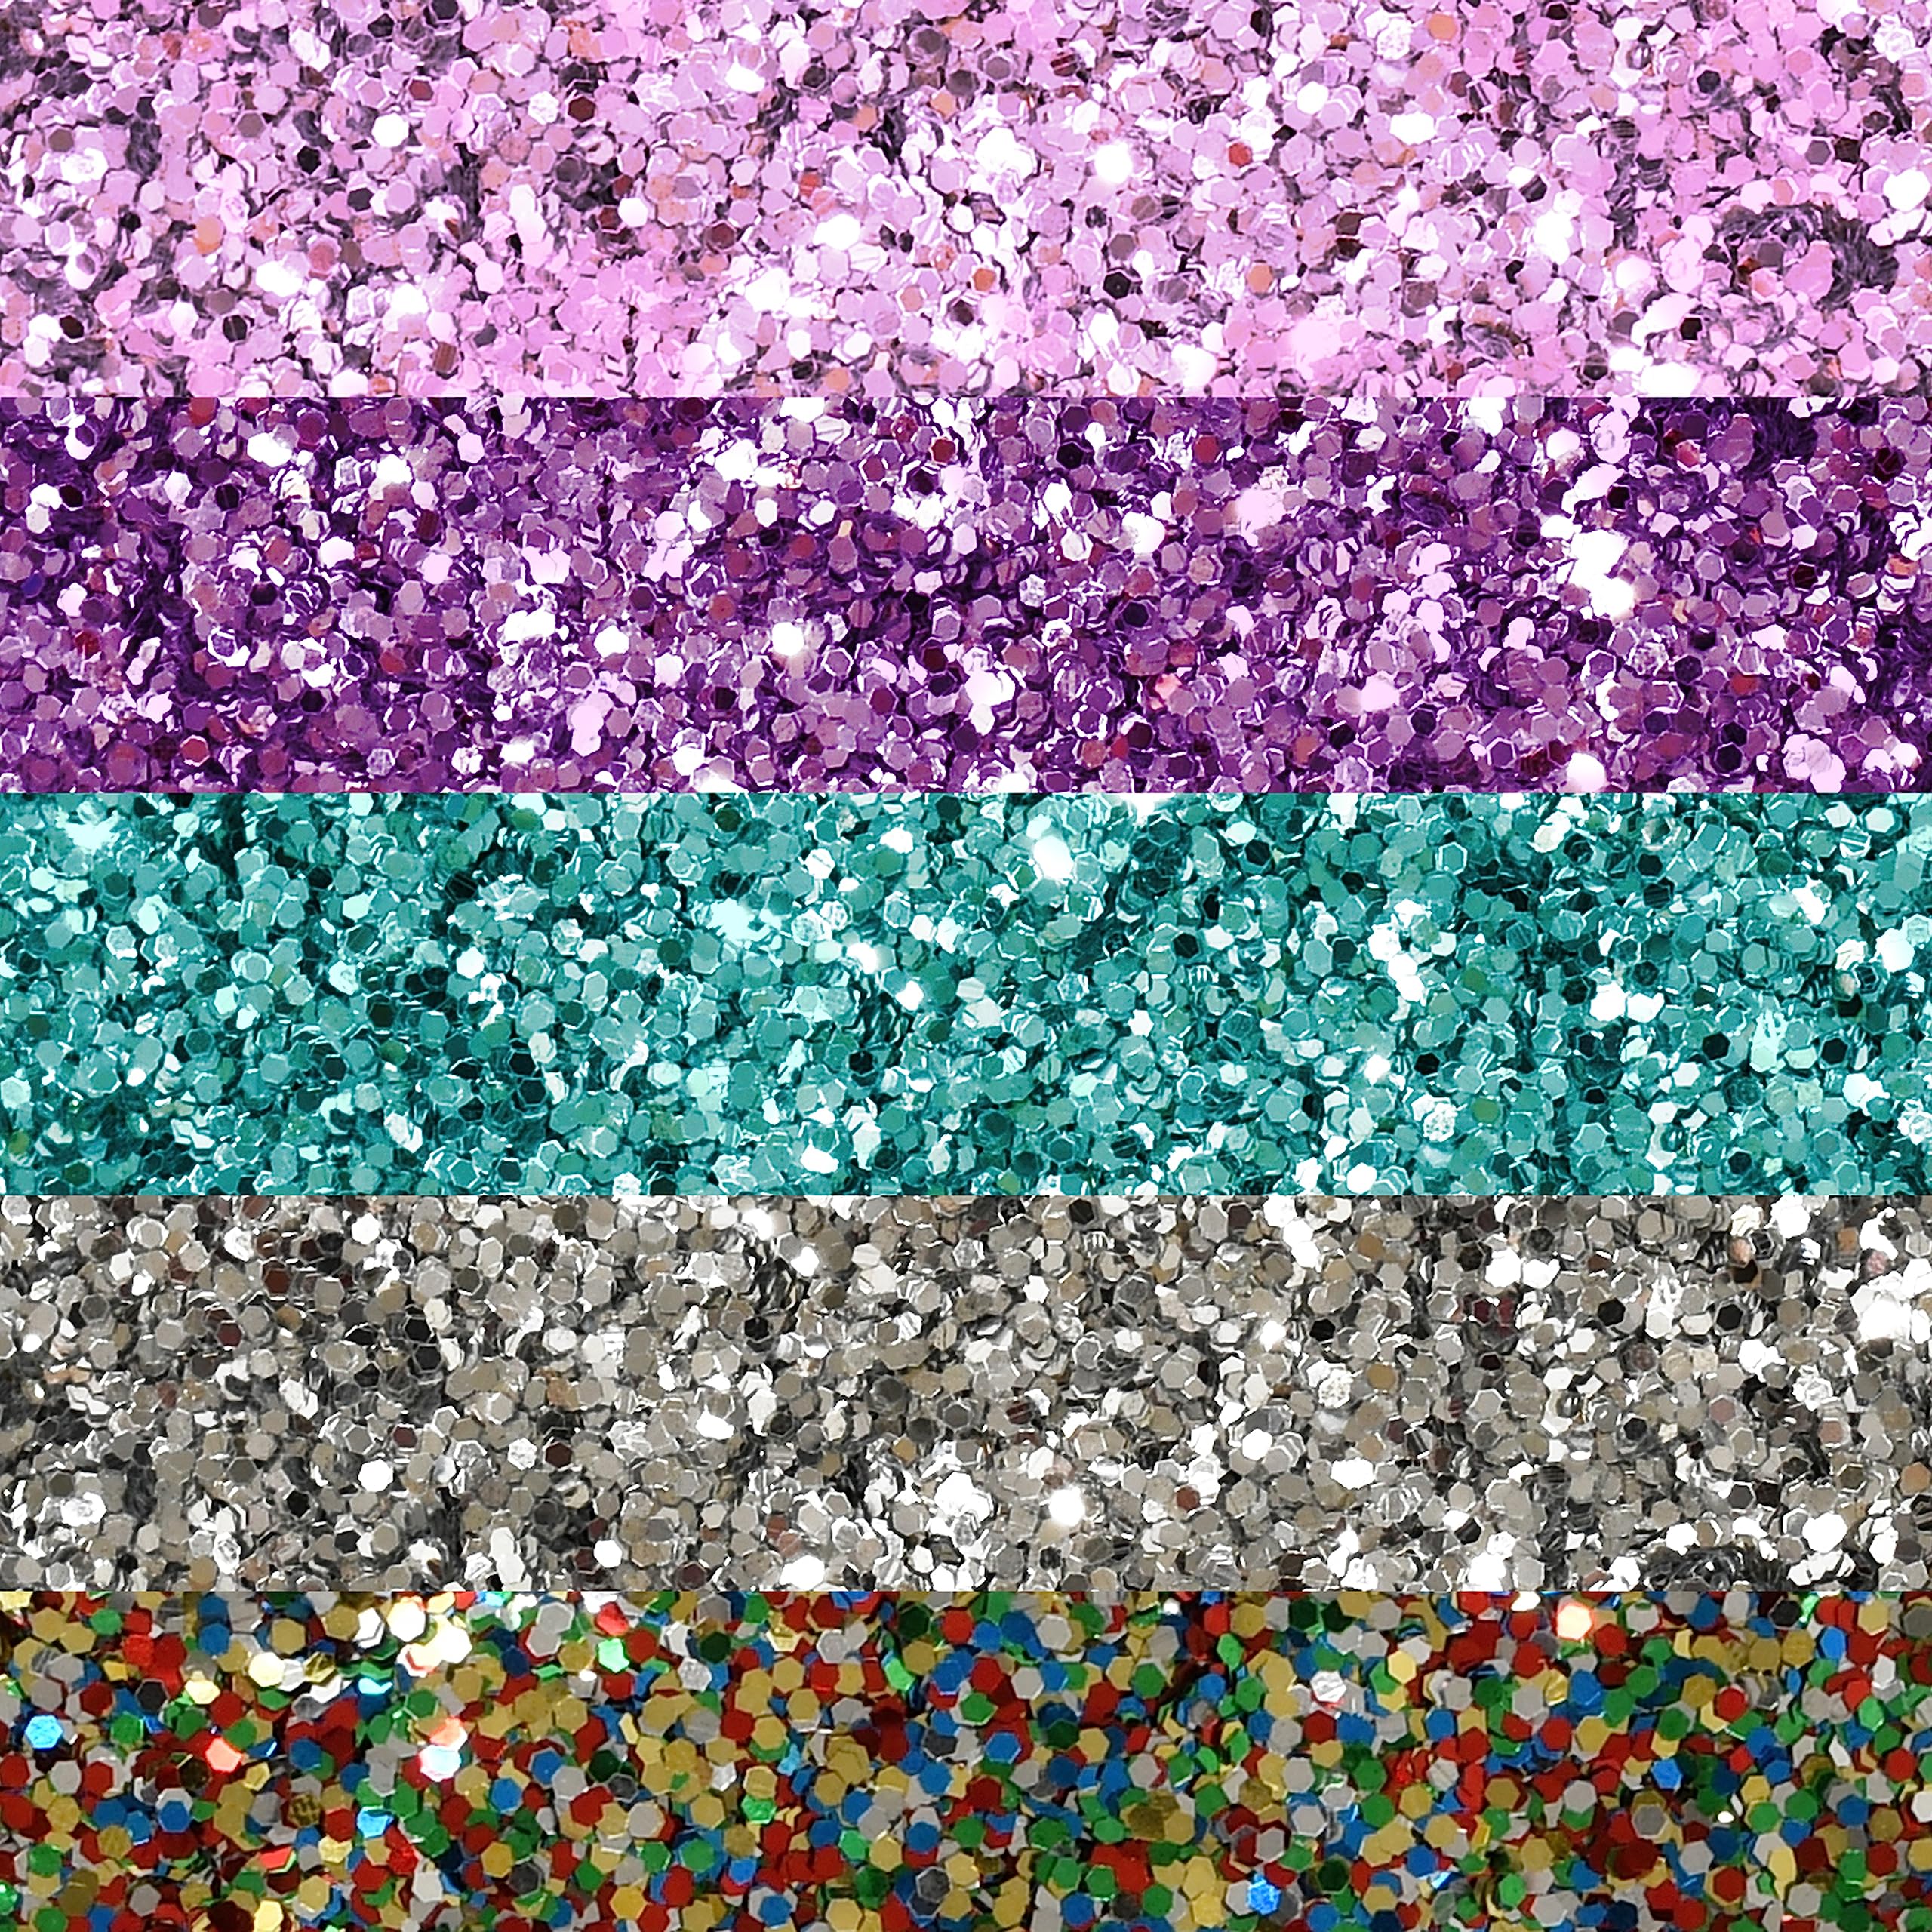 READY 2 LEARN Glitter - Electric - Set of 5-1.8 oz Each - Craft Glitter Kit - Pink, Purple, Turquoise, Silver and Multicolor - Perfect for Crafting and DIY